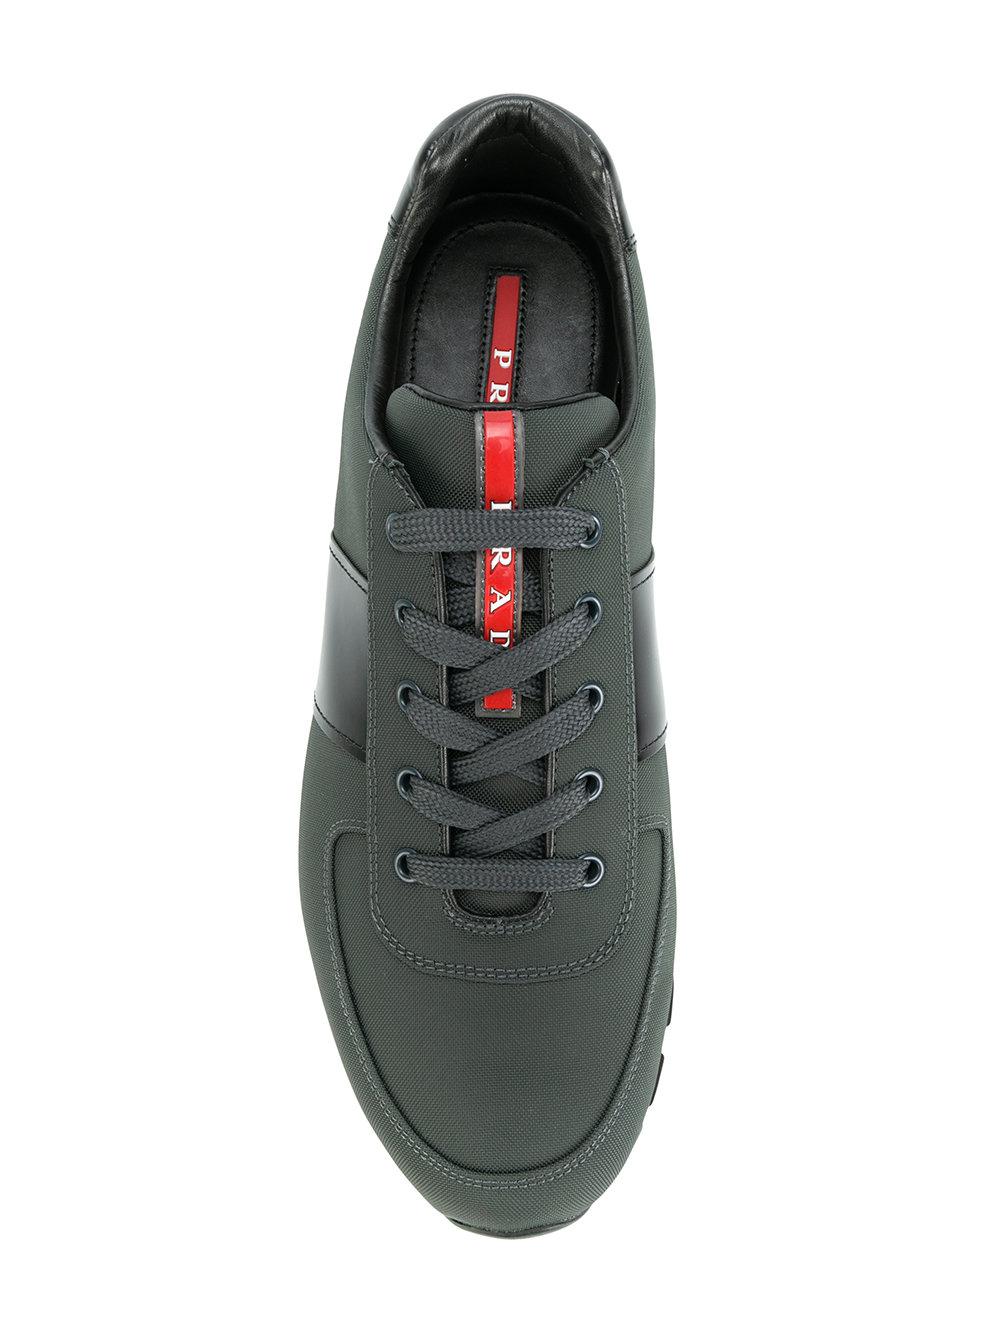 Prada Leather Match Race Trainers in Grey (Grey) for Men - Lyst